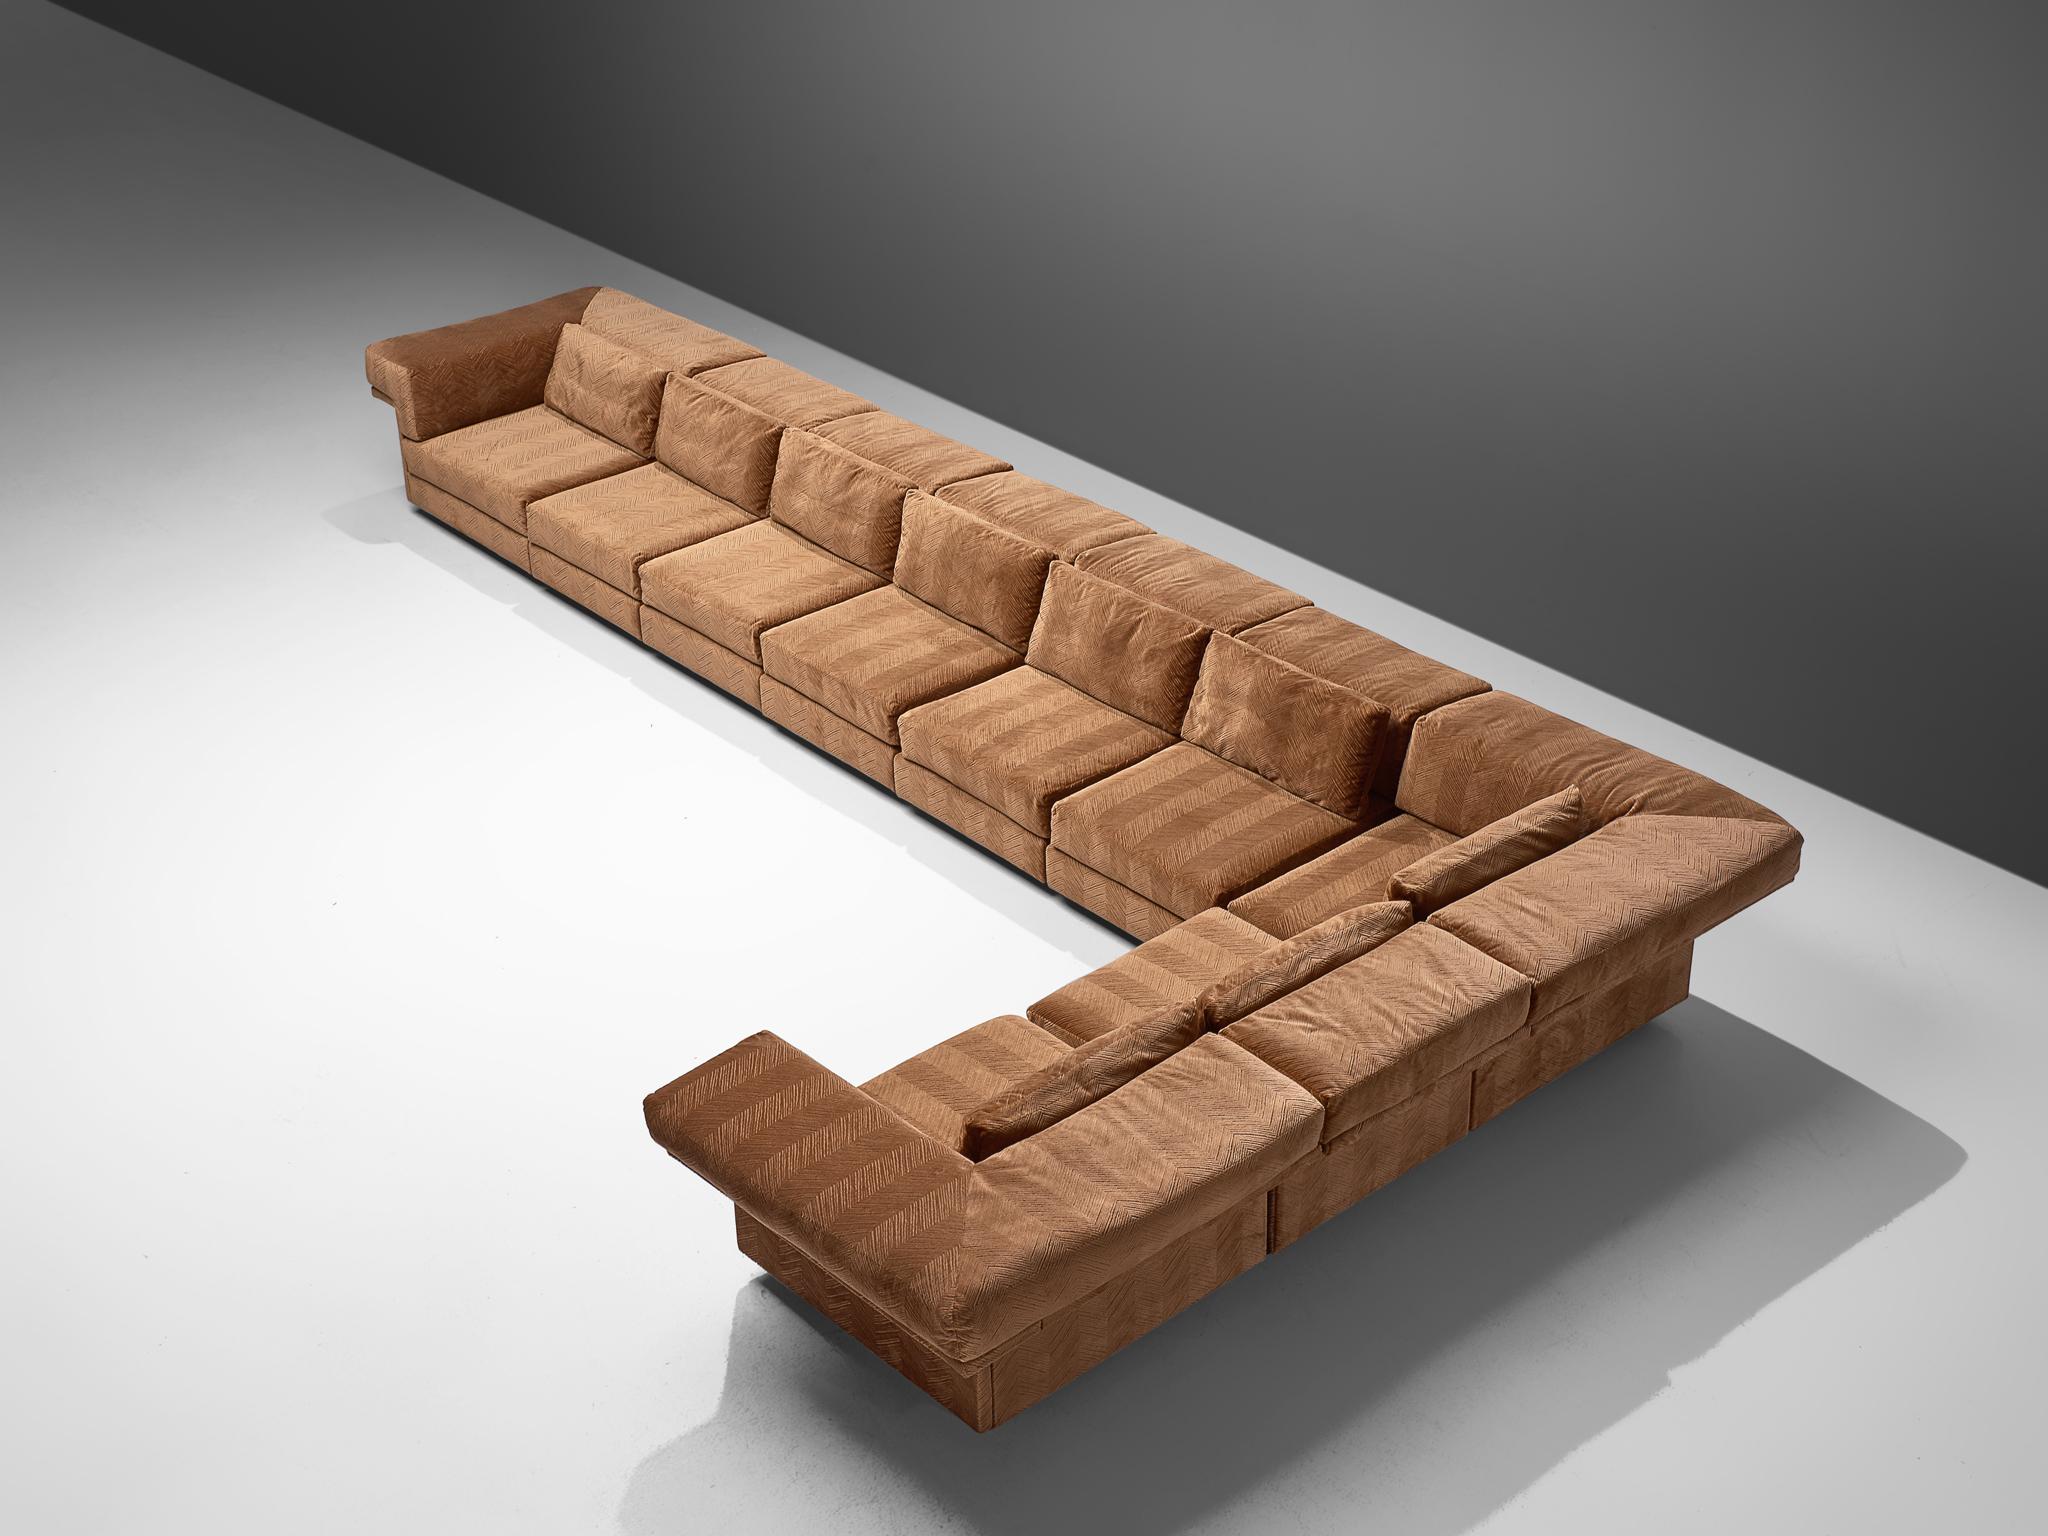 Sectional sofa, brown camel fabric, Germany, 1970s.

This extremely large sectional sofa contains three corner elements and seven straight elements, this makes it possible to arrange this sofa to your own wishes. The design is simplistic and